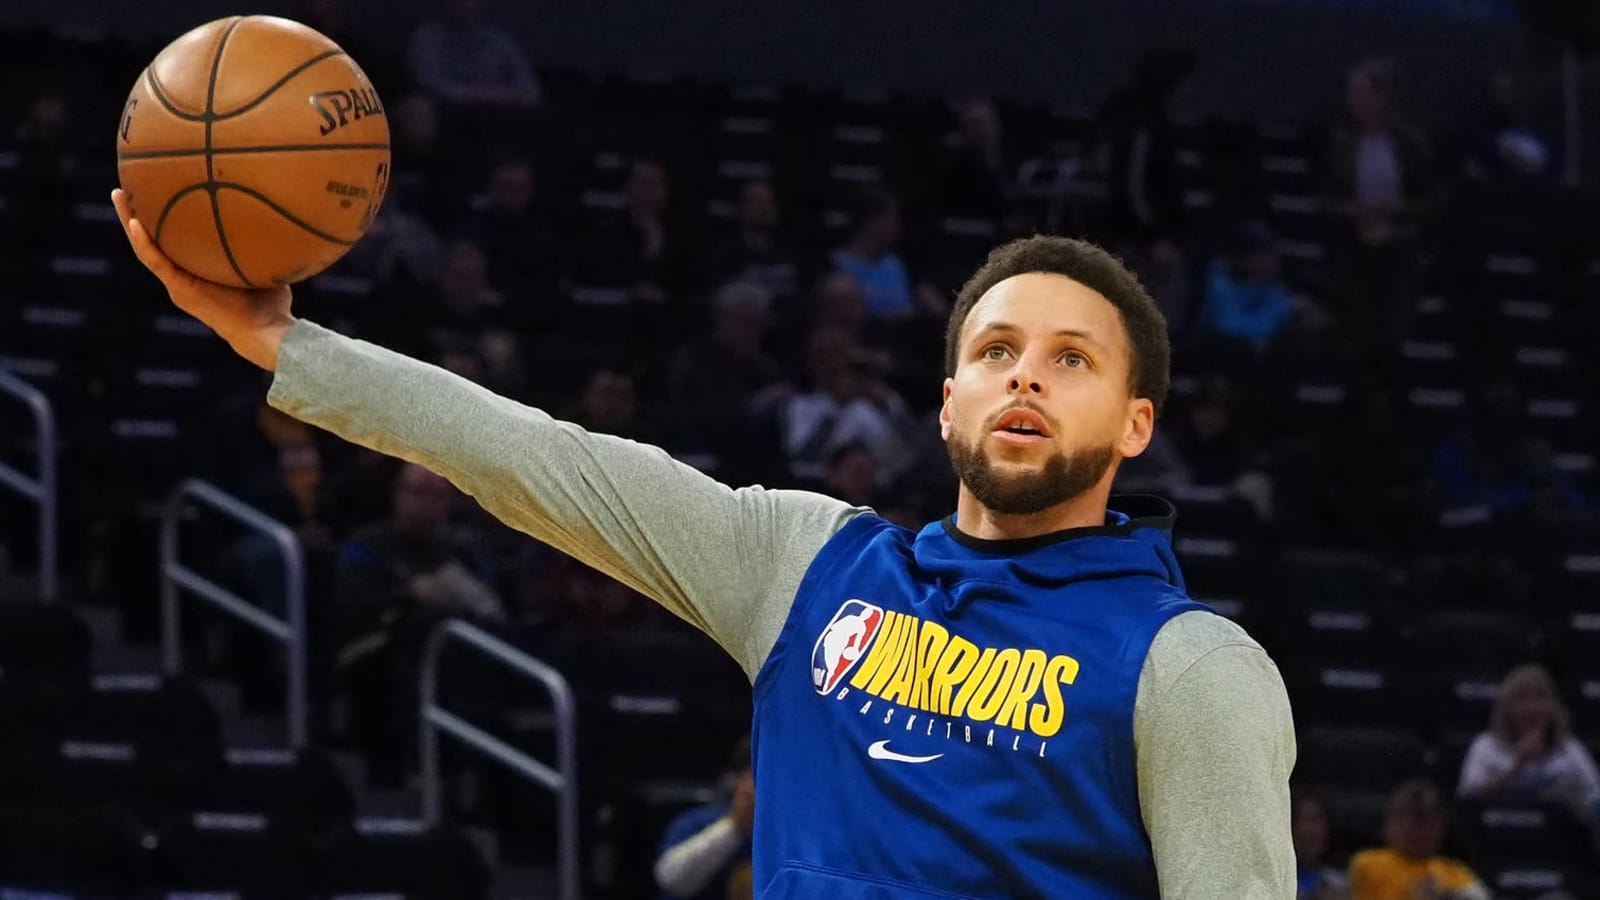 Report: Stephen Curry to play Thursday vs. Raptors